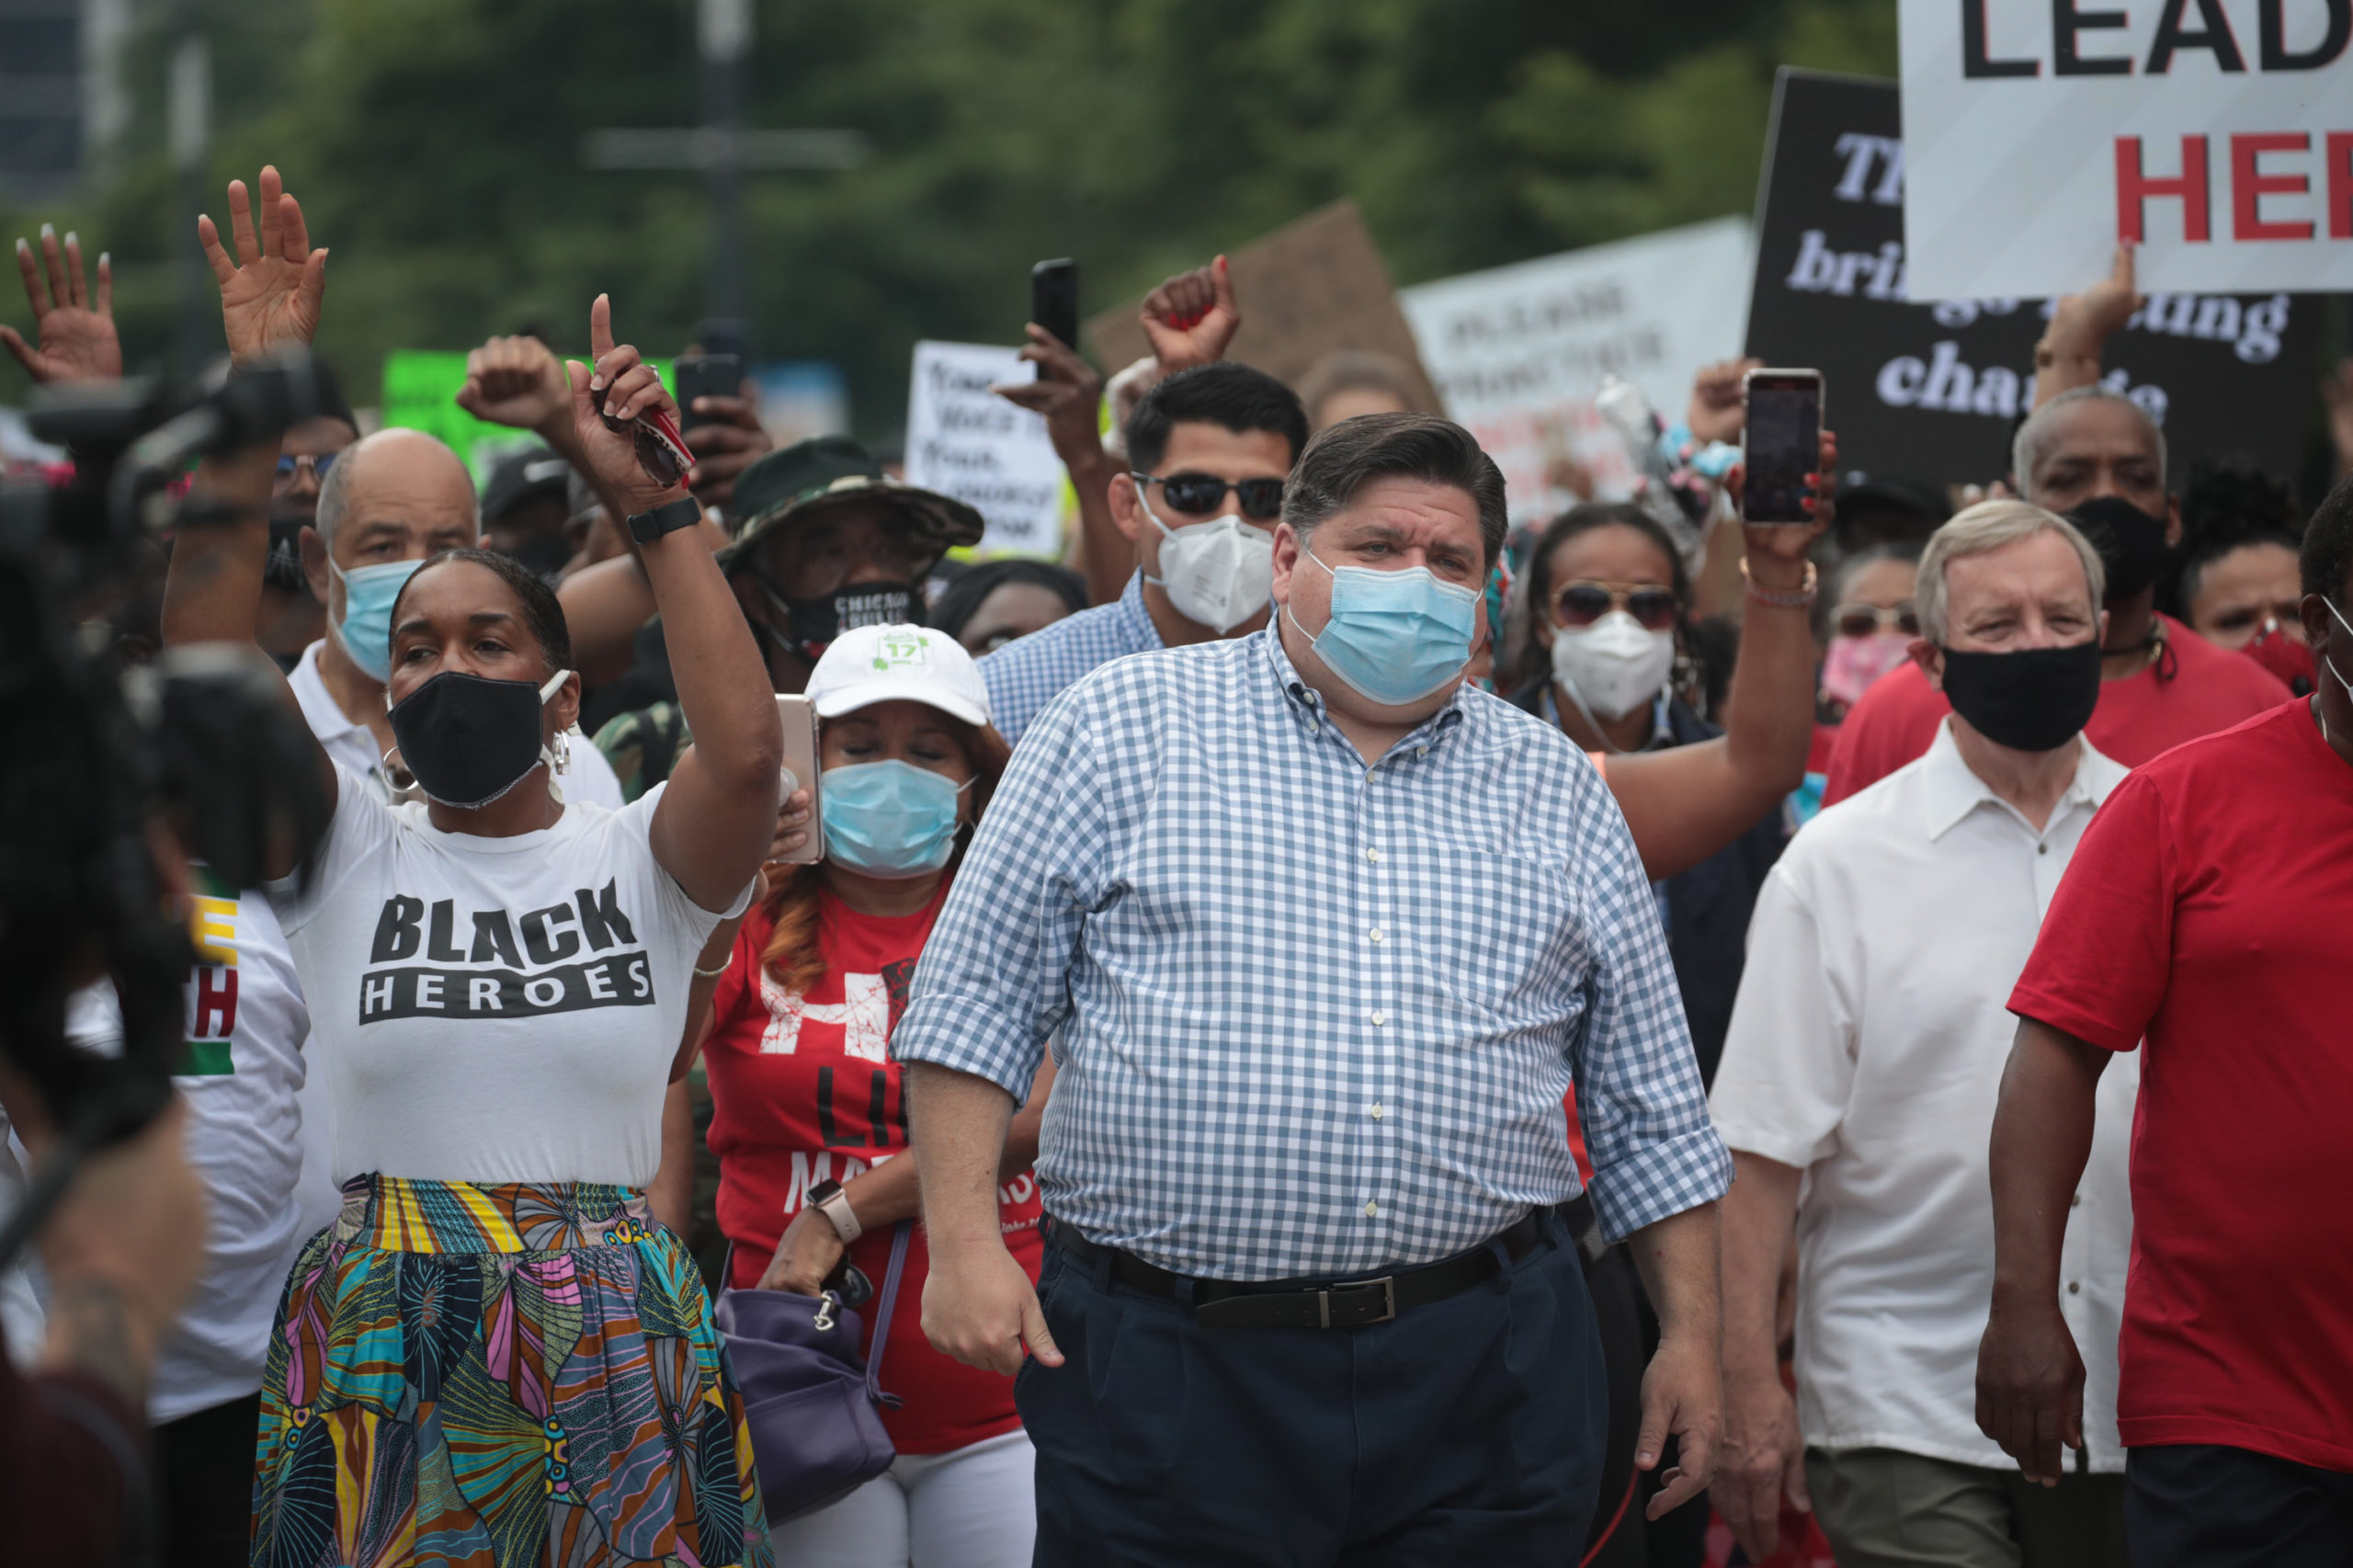 CHICAGO, ILLINOIS - JUNE 19: Illinois Governor J.B. Pritzker participates in a Juneteenth march organized by faith leaders on June 19, 2020 in Chicago, Illinois. Juneteenth commemorates June 19, 1865, when a Union general read orders in Galveston, Texas stating all enslaved people in Texas were free according to federal law. (Photo by Scott Olson/Getty Images)